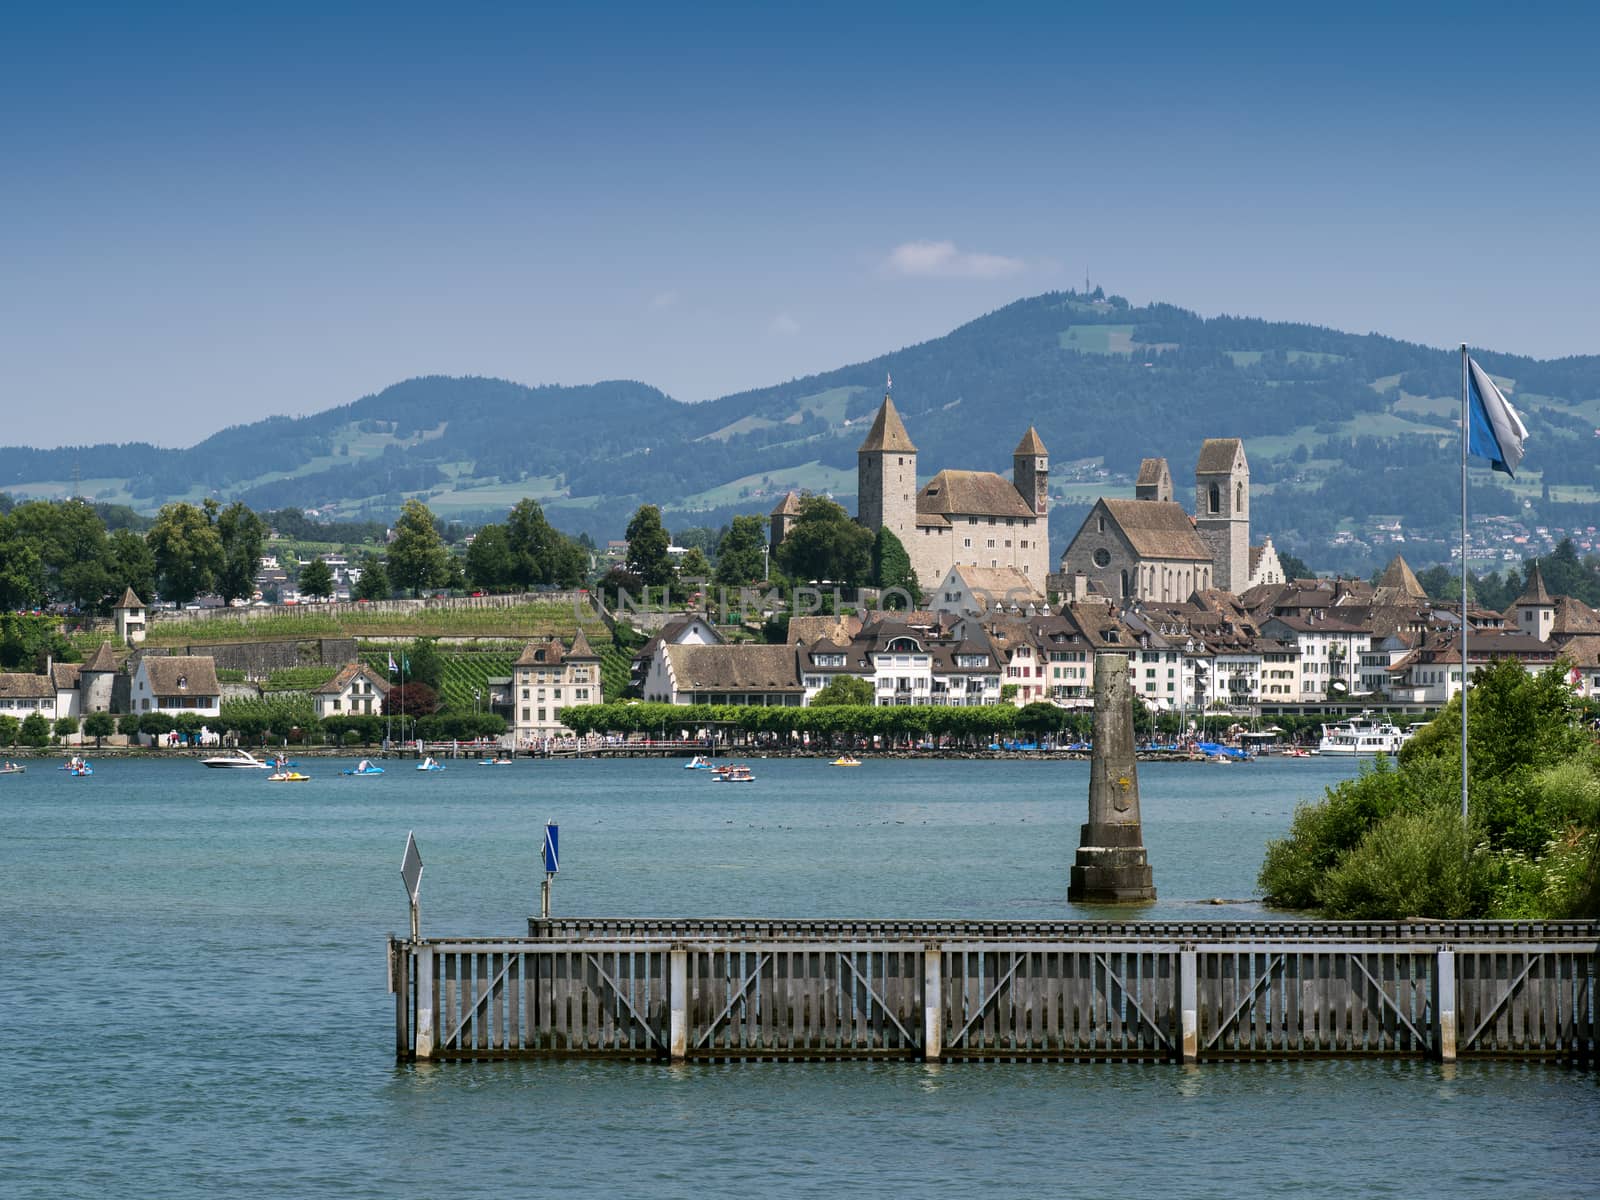 Photo of the beautiful city of Rapperswil in Switzerland.